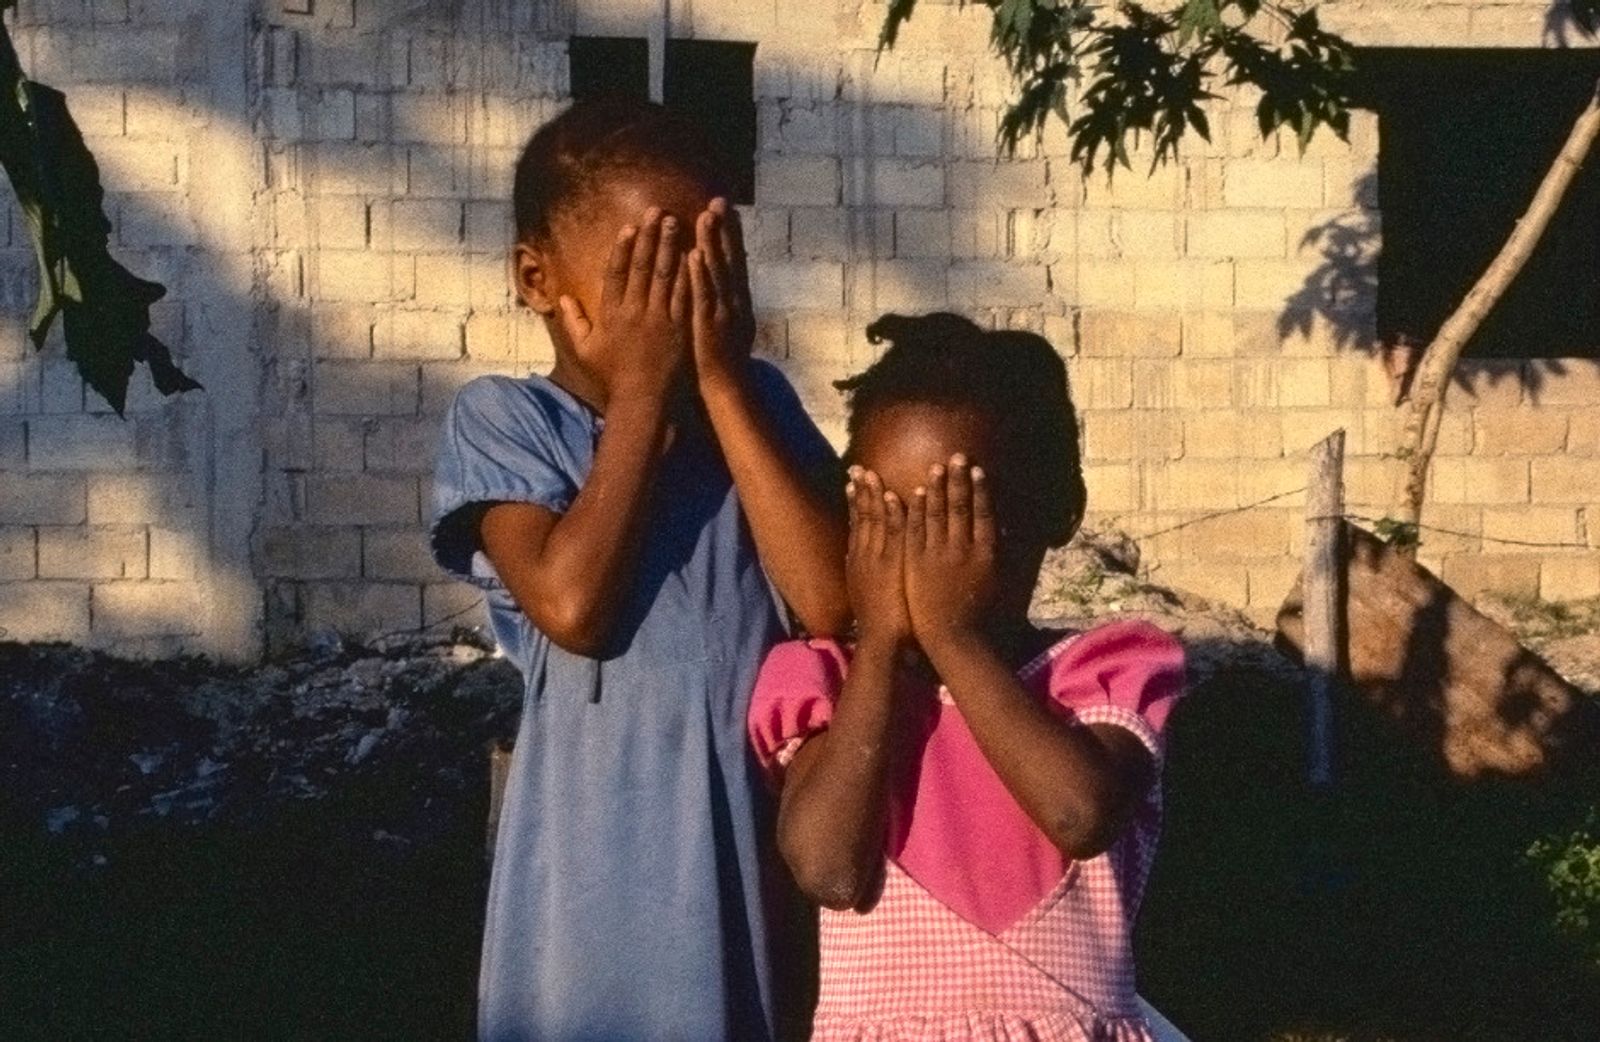 © Steven Edson - Girls covering their eyes. Jamaica, West Indies